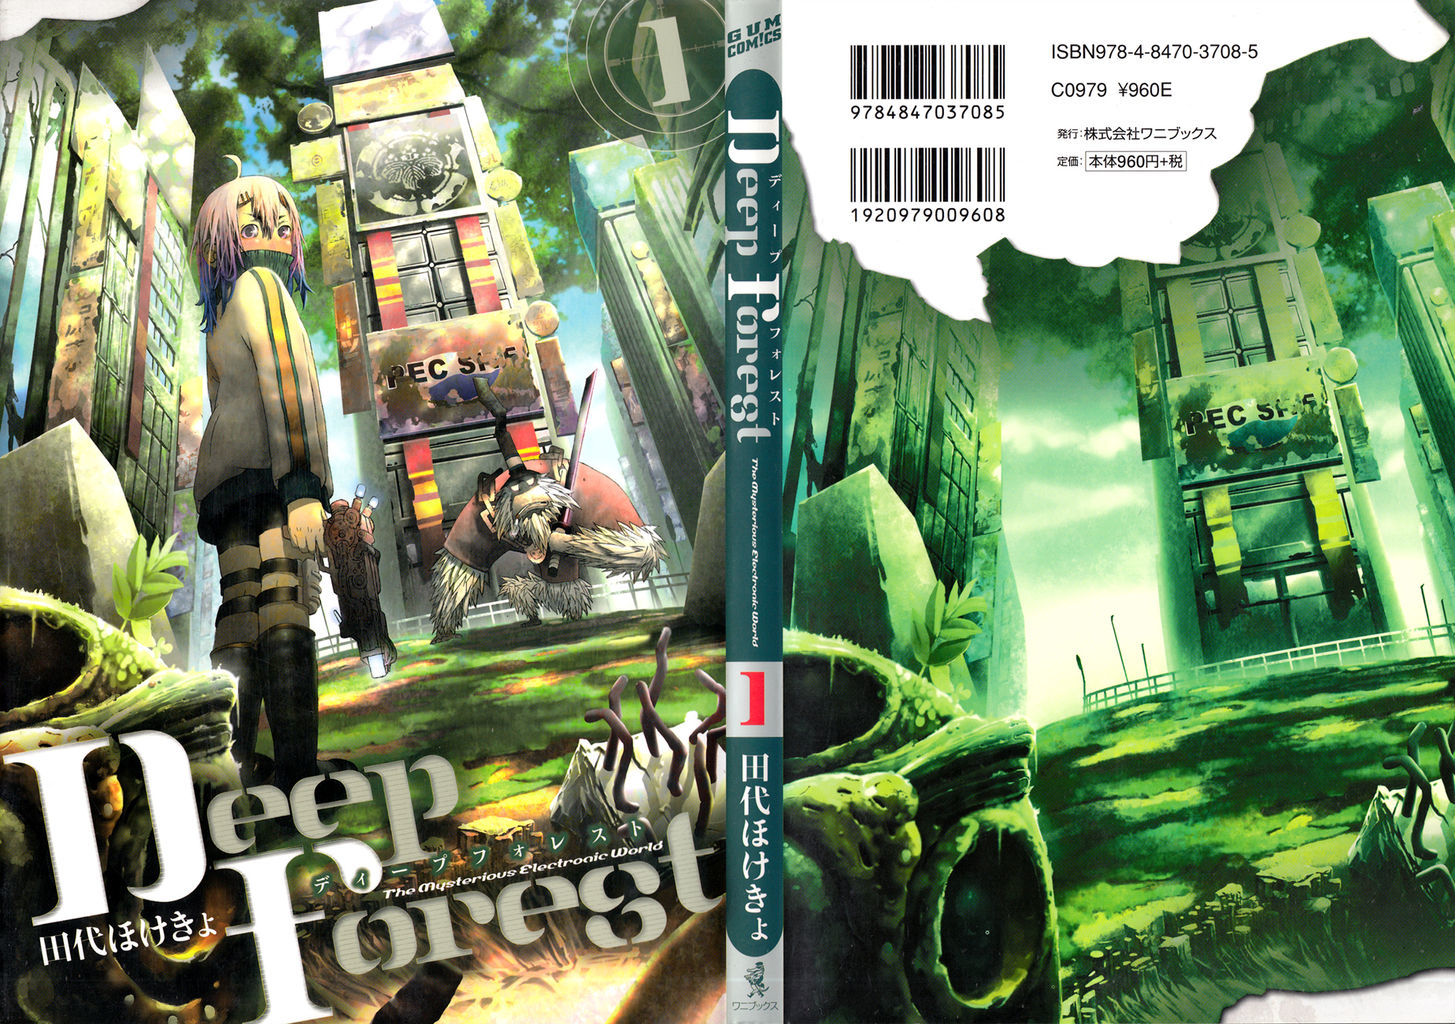 Deep Forest - The Mysterious Electronic World - Page 1